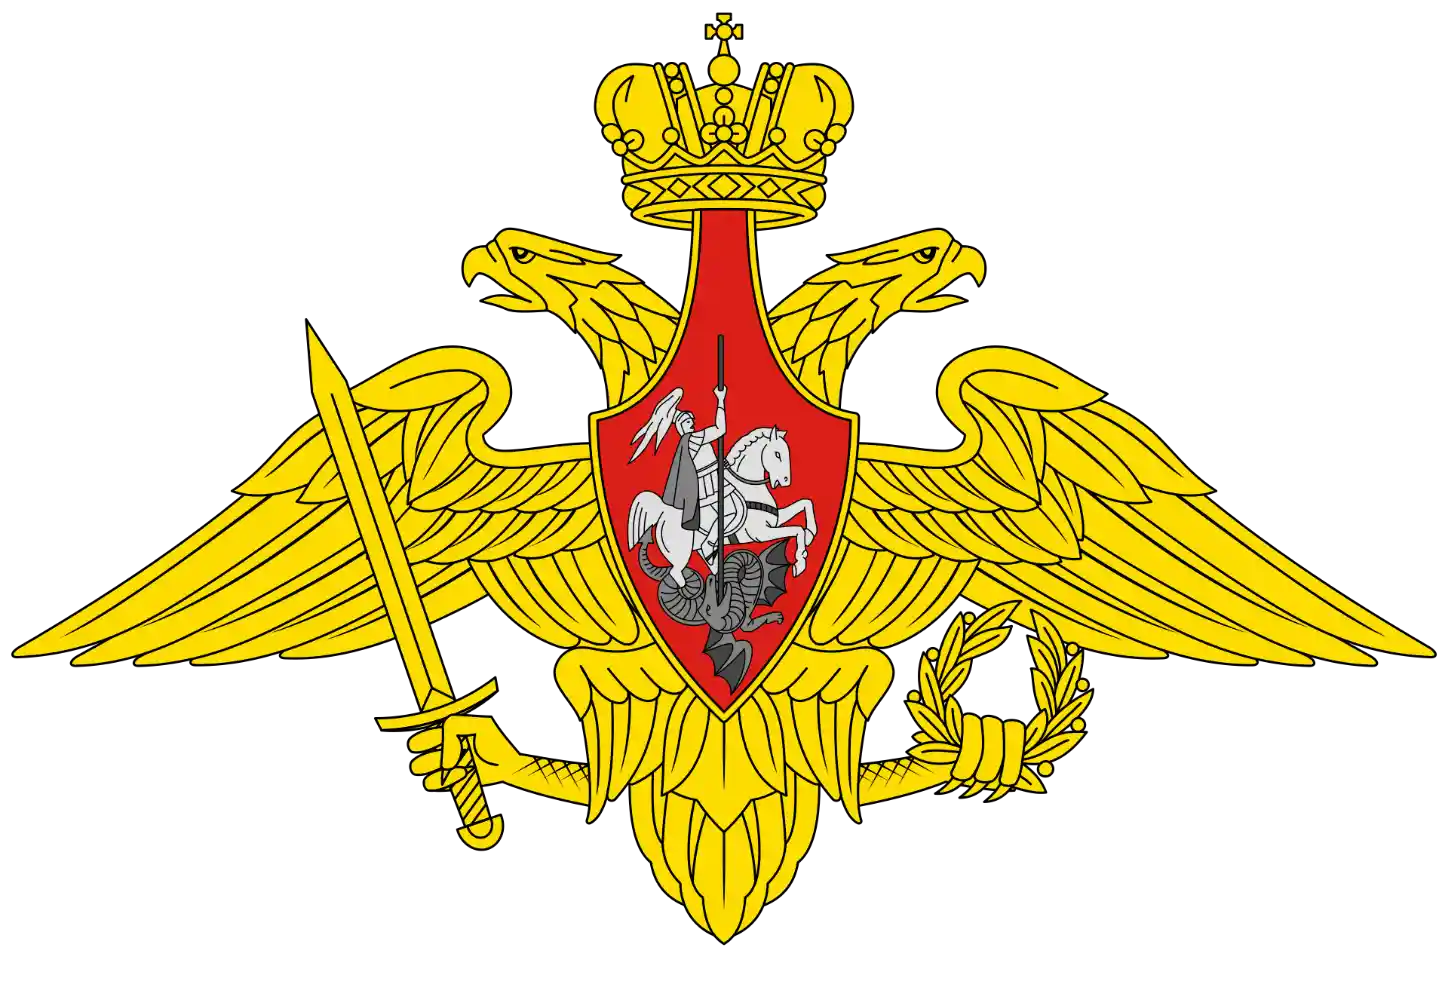 Middle_emblem_of_the_Armed_Forces_of_the_Russian_Federation_27.01.1997-present.svg.png